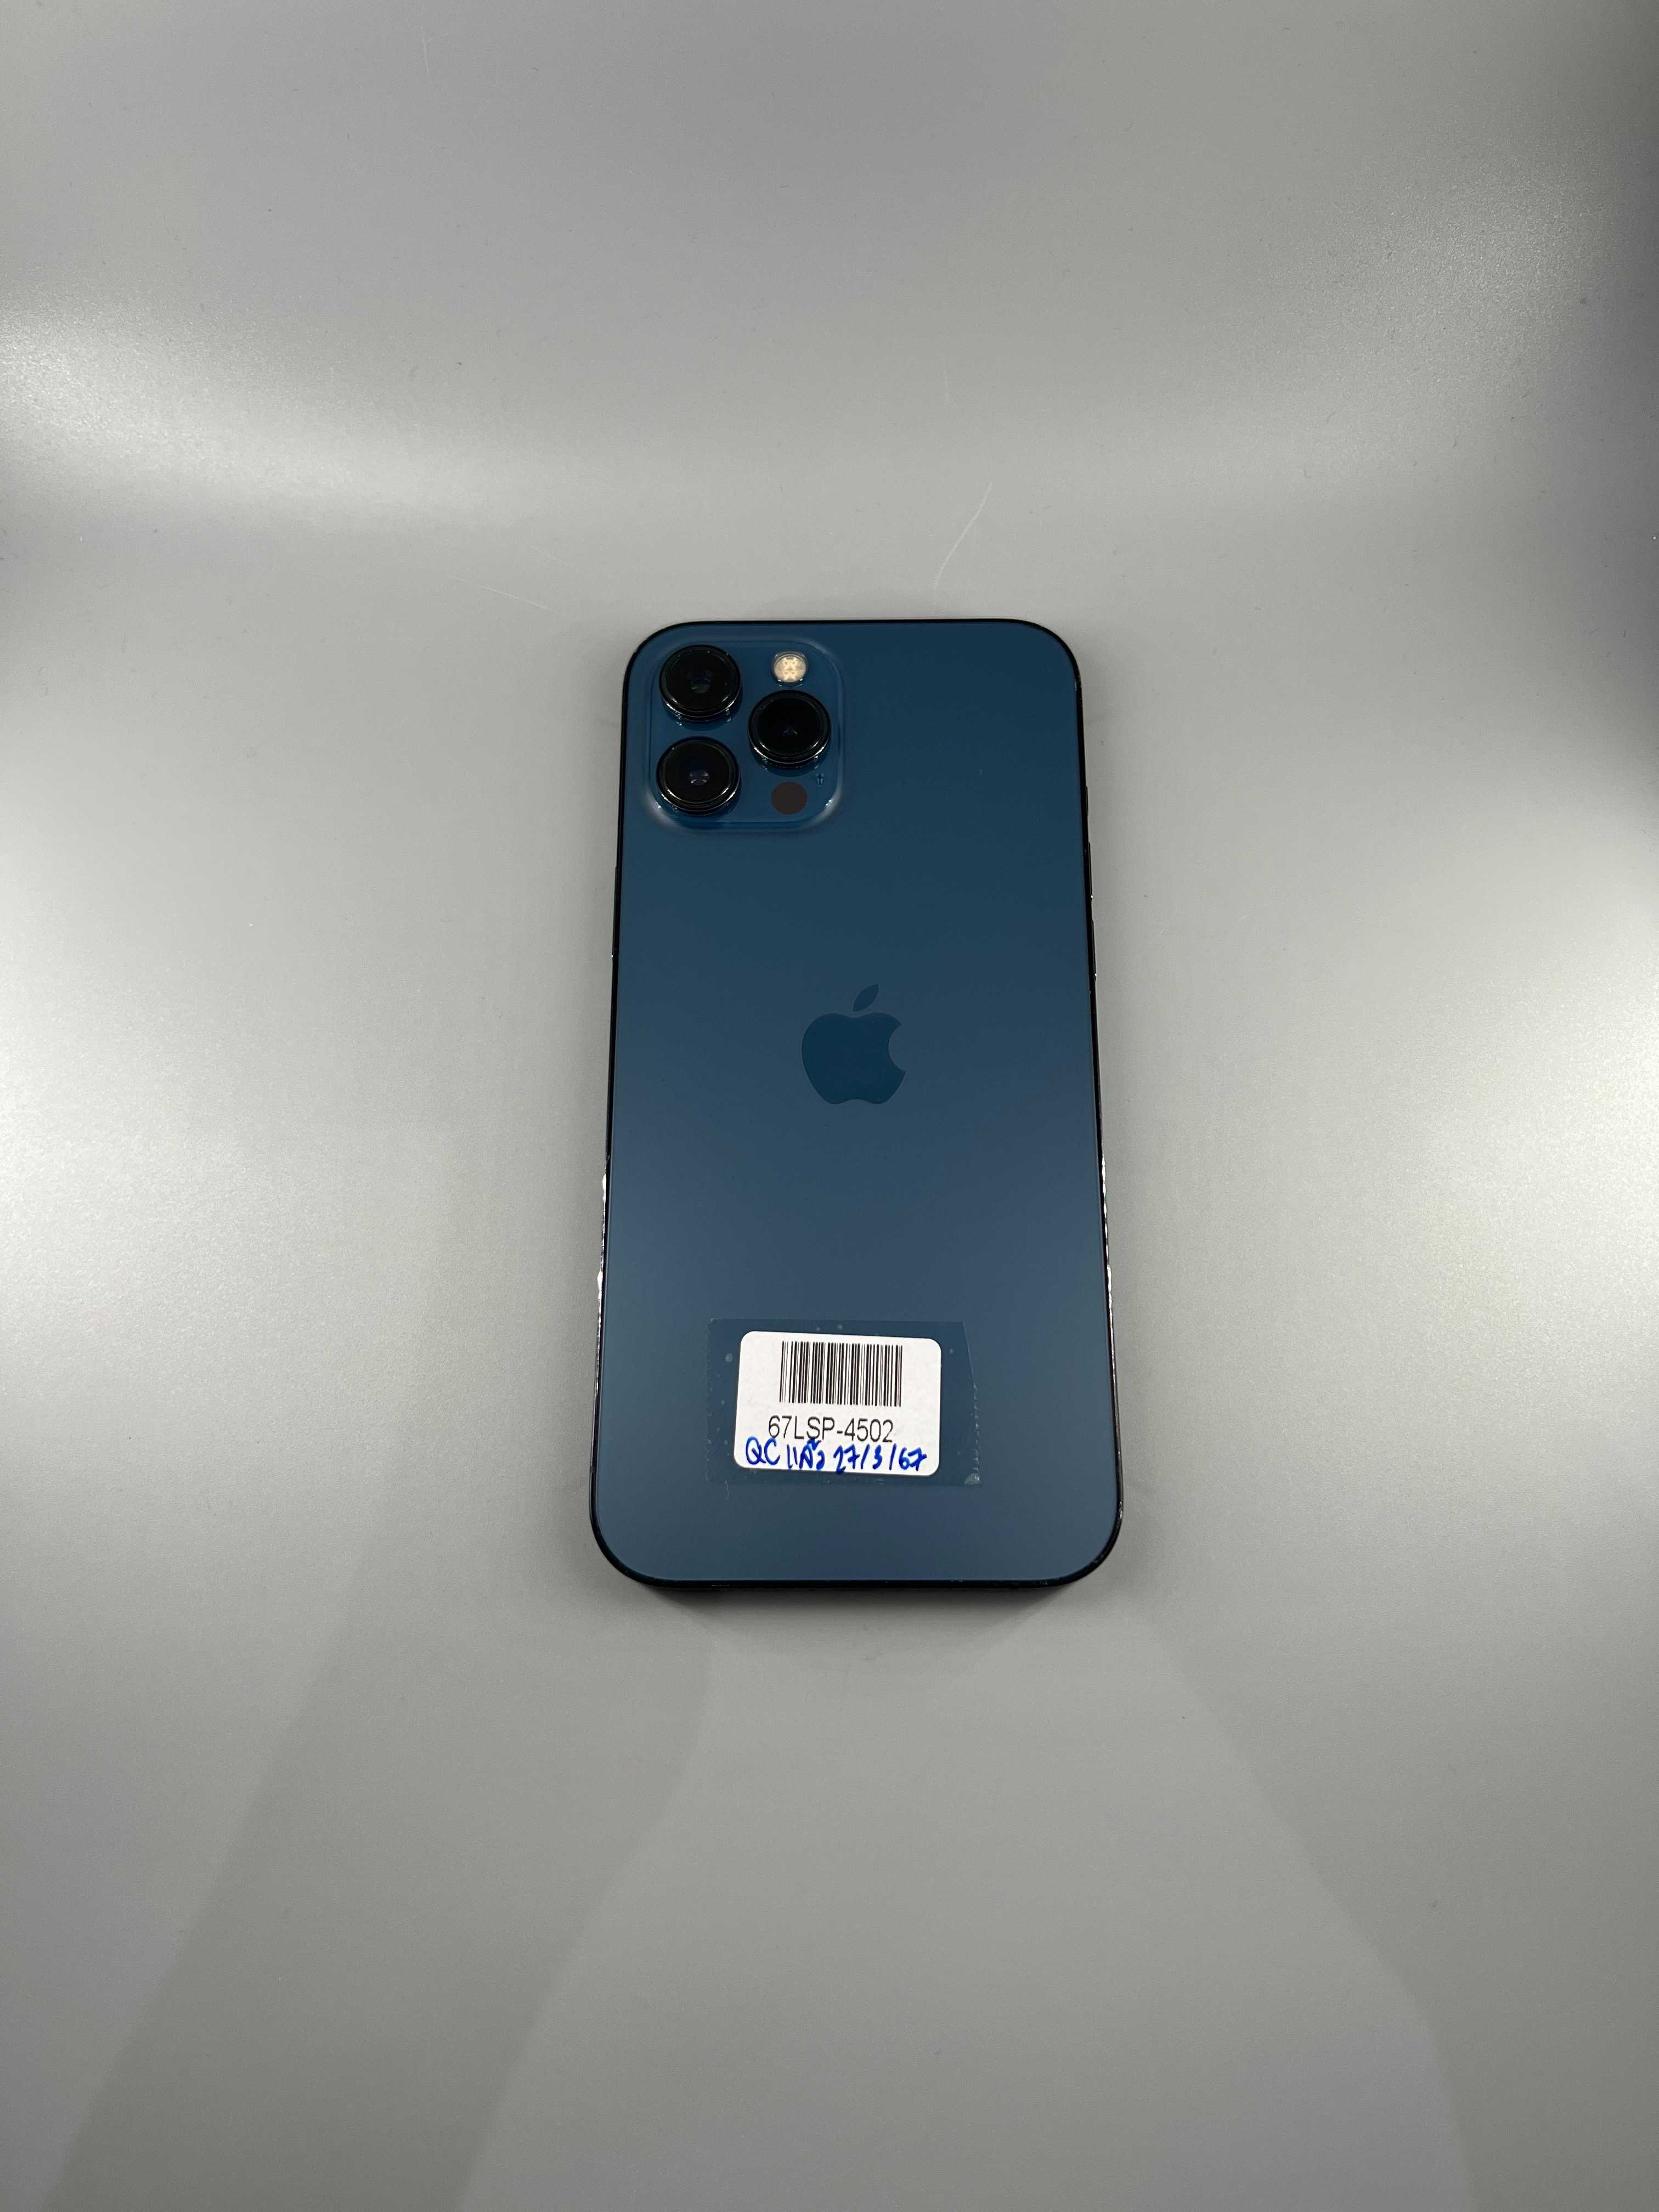 Used iPhone 12 Pro max 256gb Pacific Blue 67LSP-4502